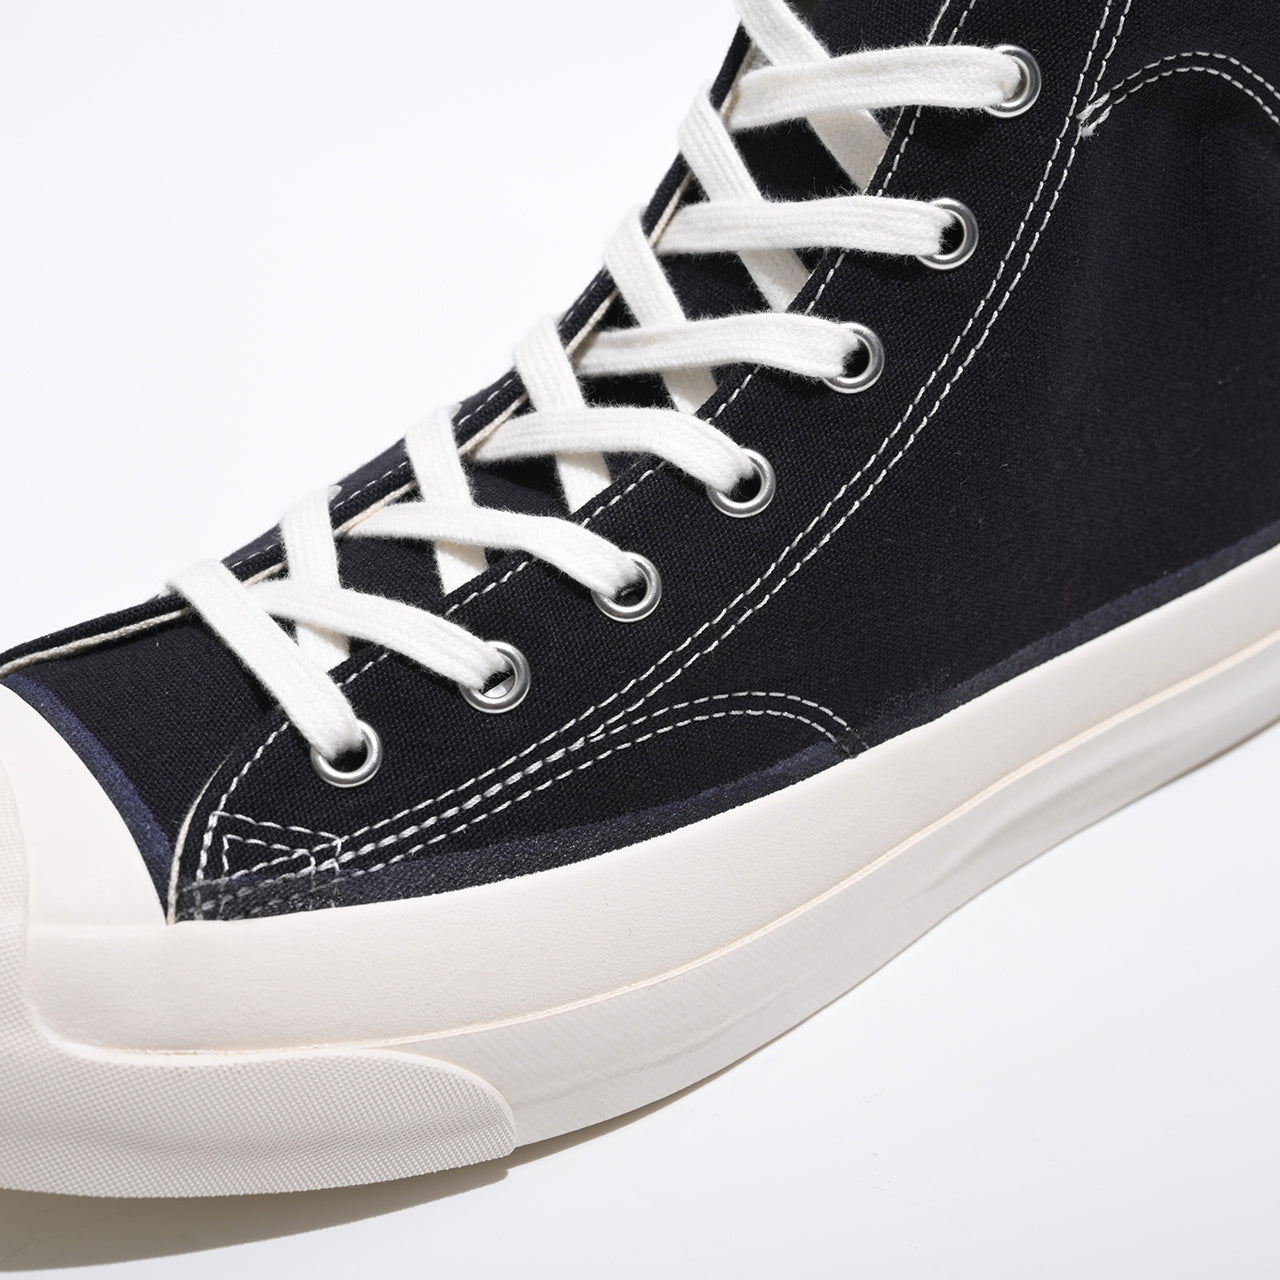 CONVERSE ADDICT コンバース アディクト JACK PURCELL CANVAS MID